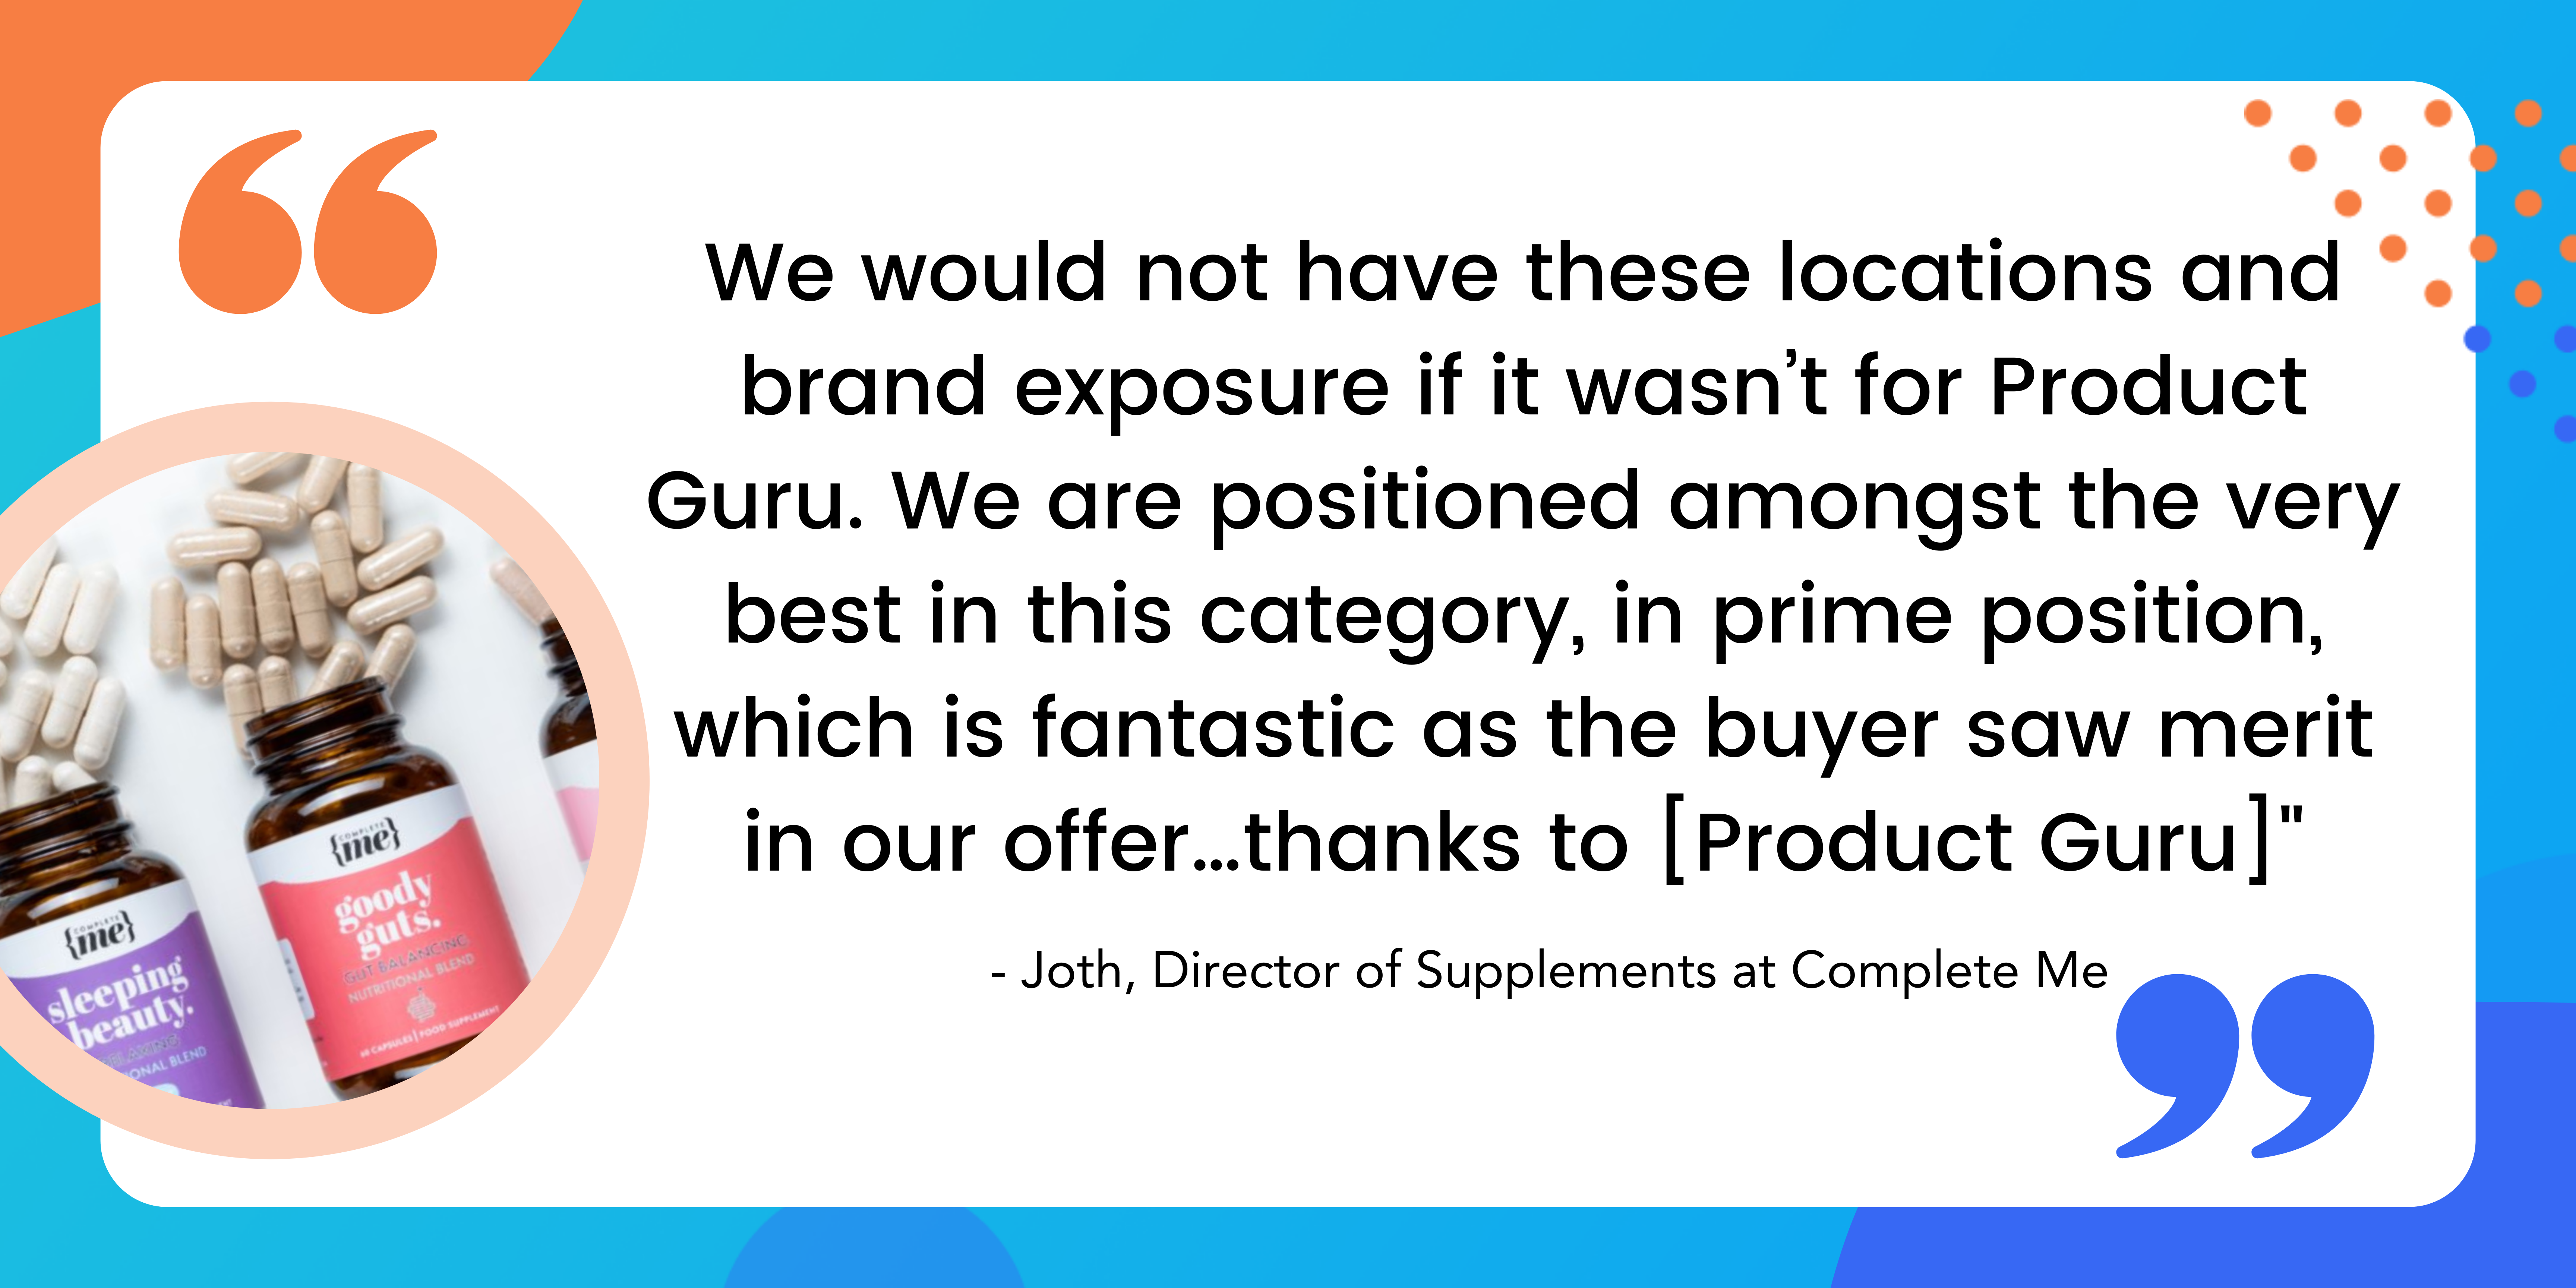 We registered Complete Me with Product Guru and created our enhanced listings for our nutritional supplements. We received an email from a buyer at WH Smith via your messaging system, asking us to discuss the opportu